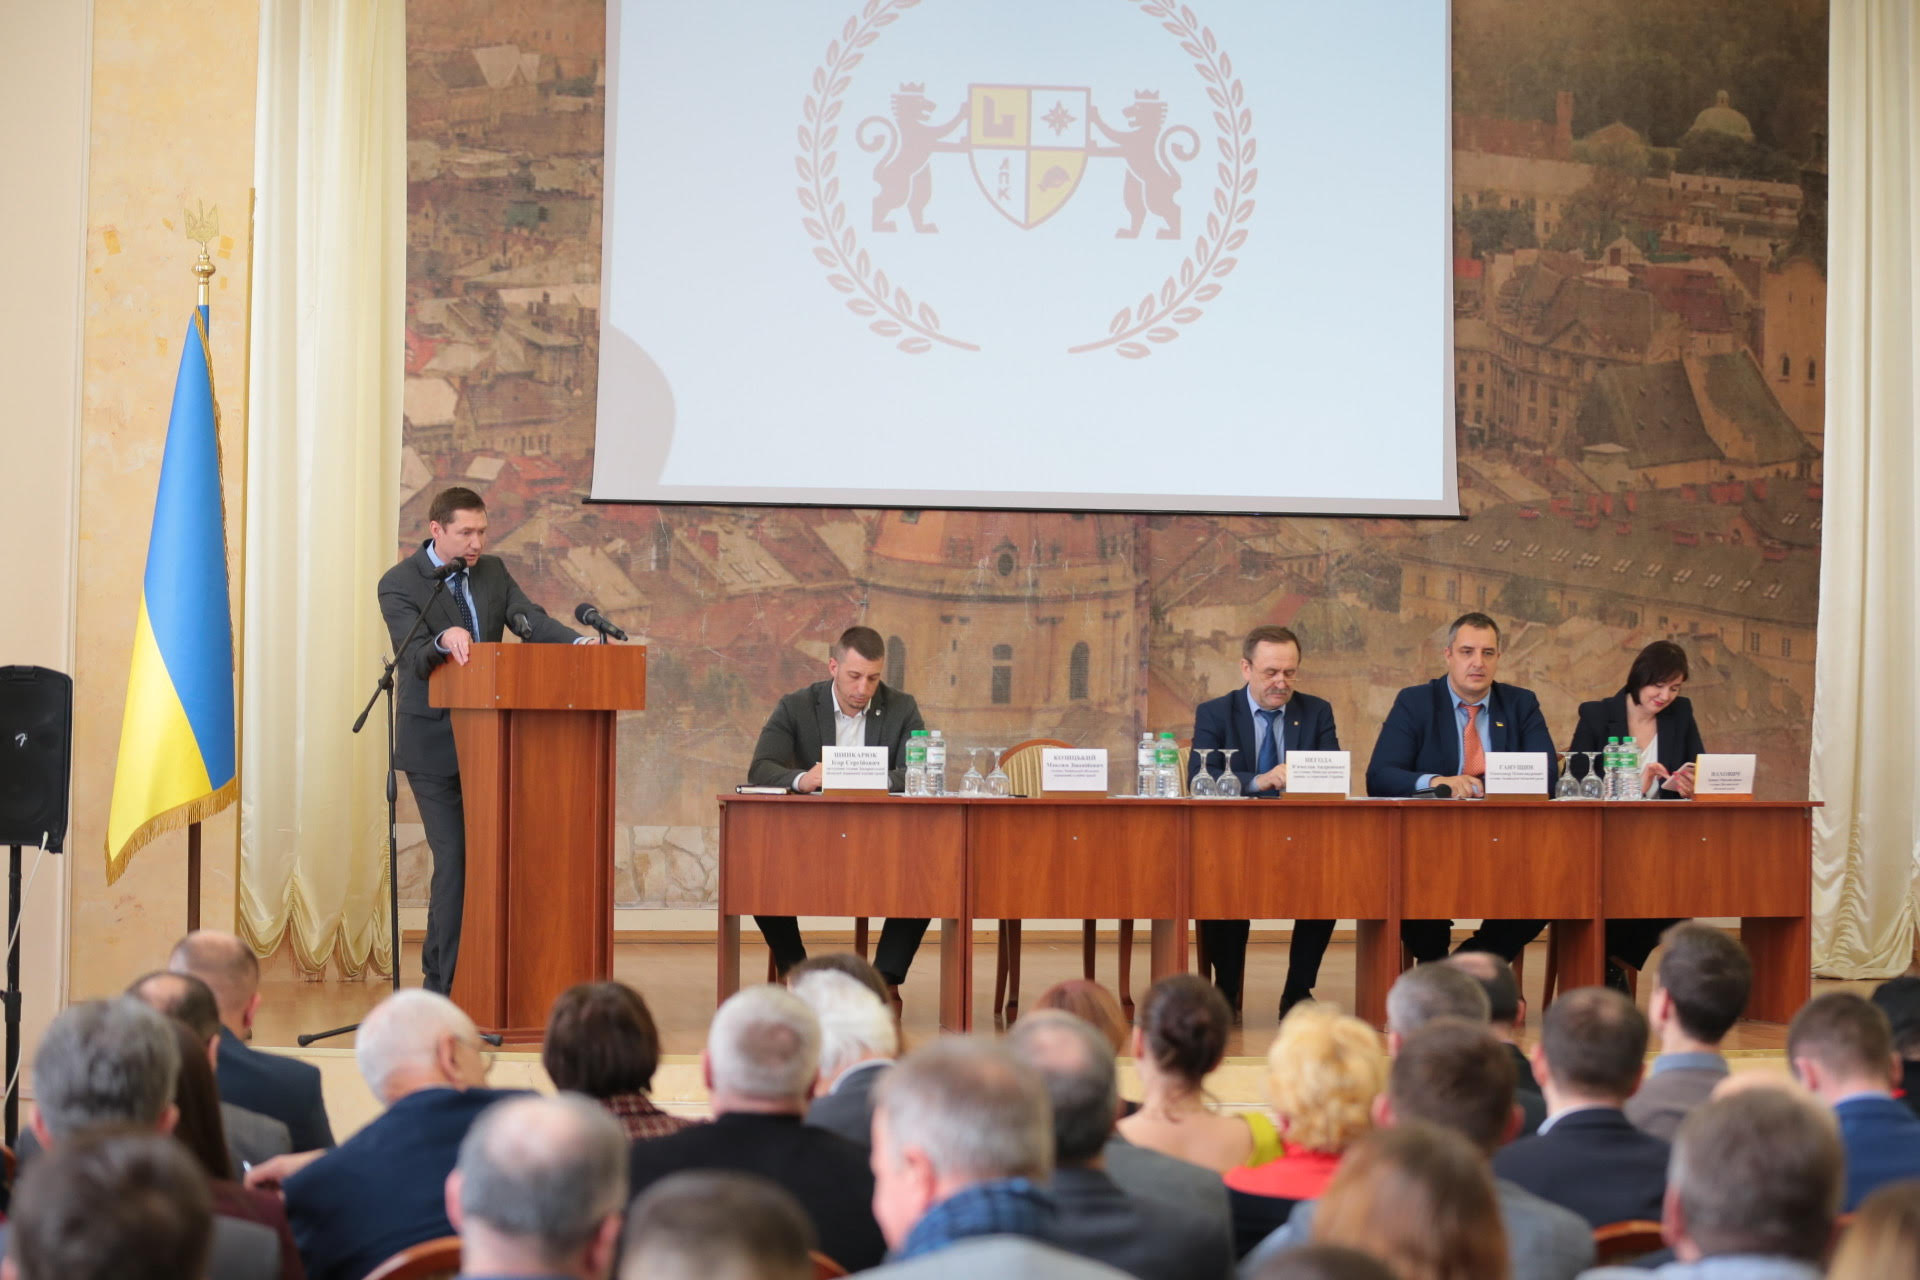 For nobody to be tempted to manipulate the local government: discussing Constitutional amendments in Lviv